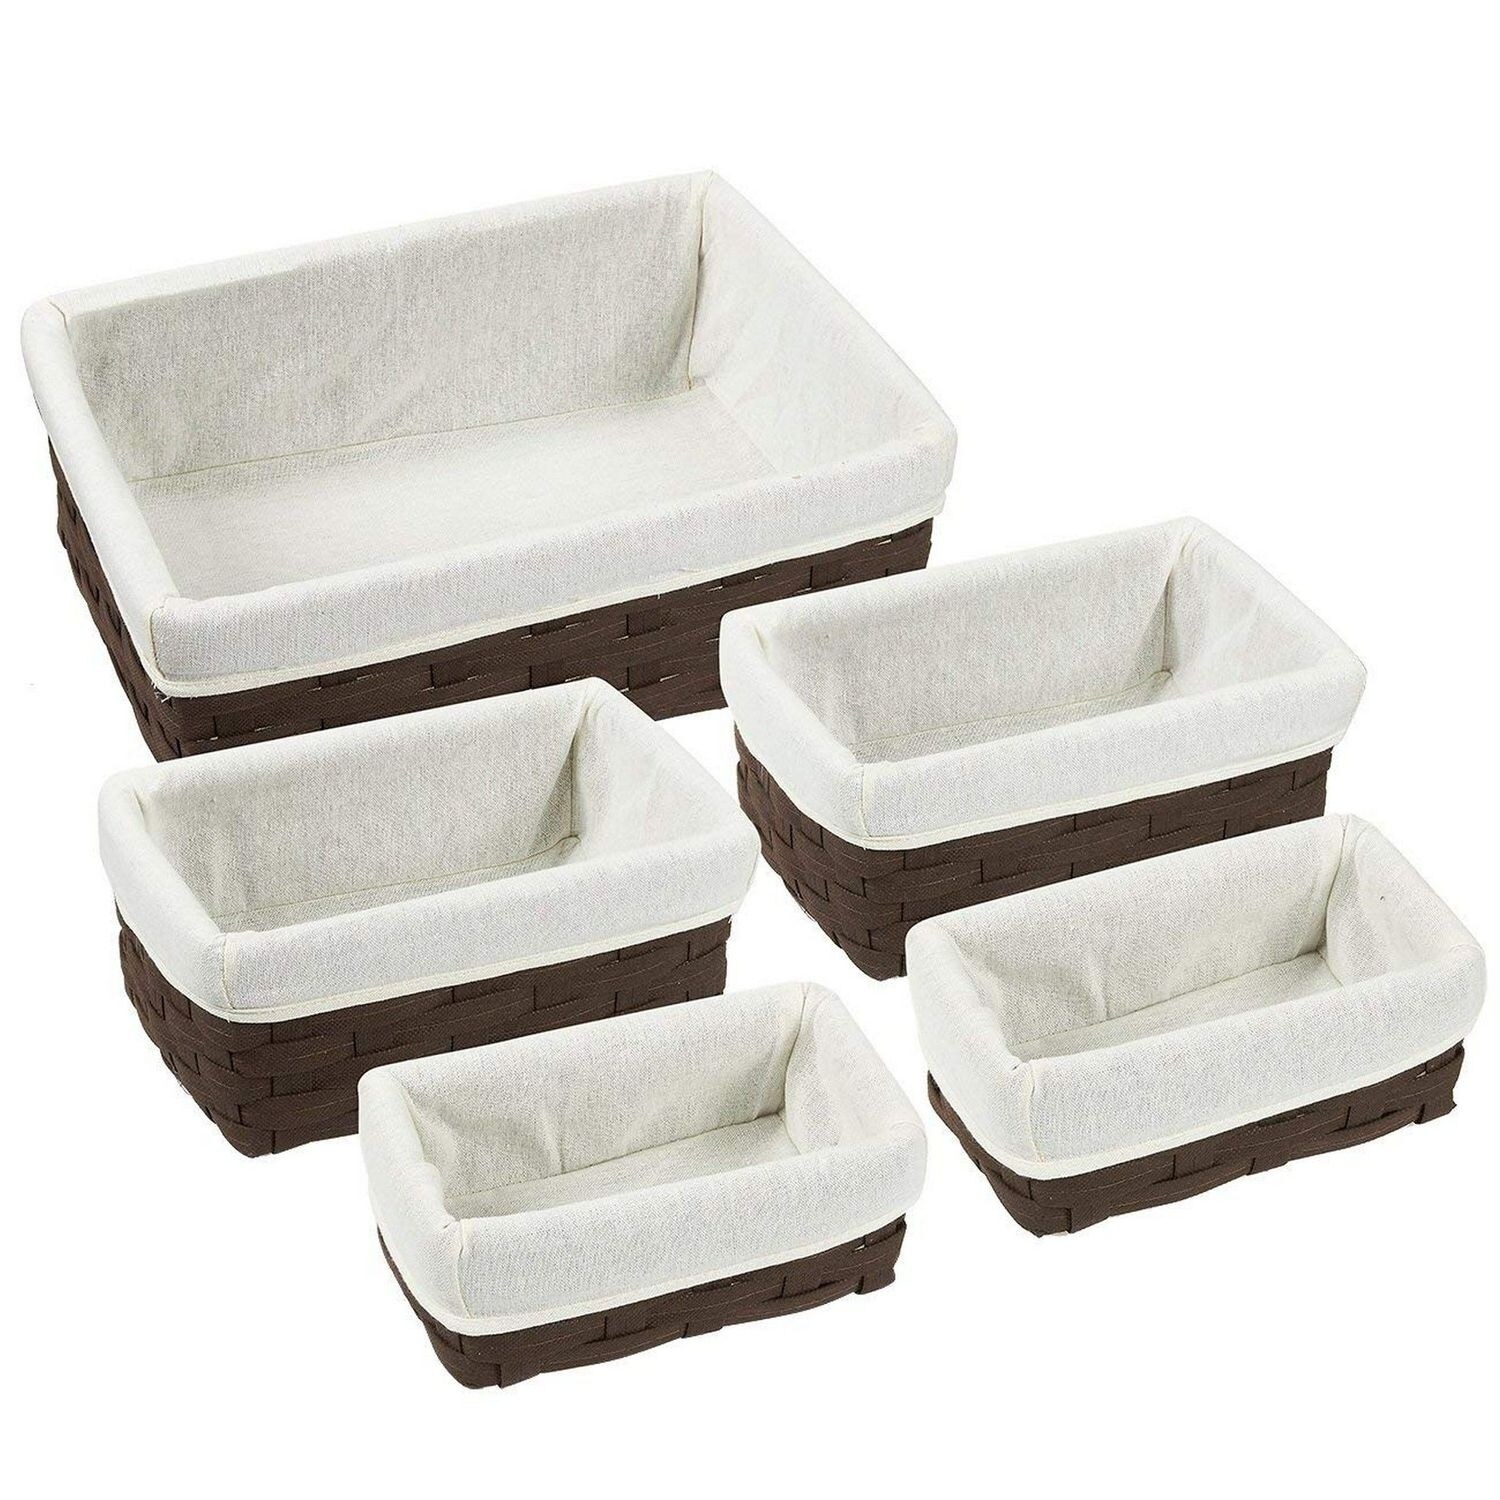 https://ak1.ostkcdn.com/images/products/29867374/Juvale-Wicker-Basket-Storage-Baskets-for-Shelves-with-Woven-Liner-5-Pack-dafaad06-0f5e-40bc-ba00-8e97f783e30a.jpg